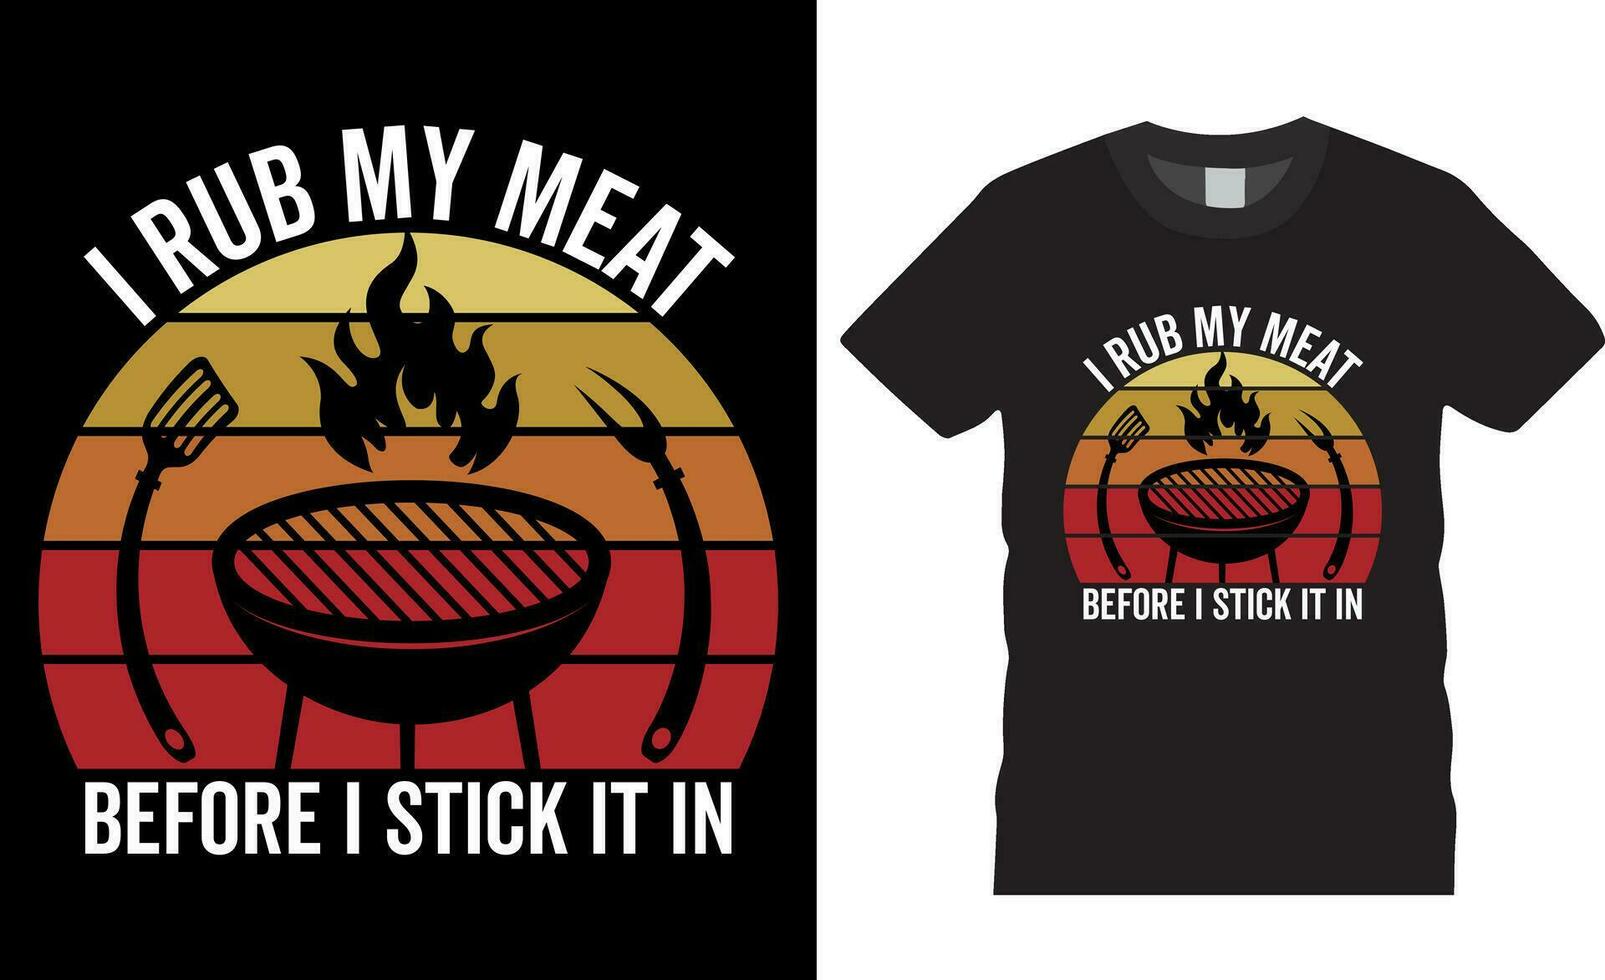 I Rub My Meat Before I Stick It in Summer BBQ Retro Vintage vector t-shirt design.